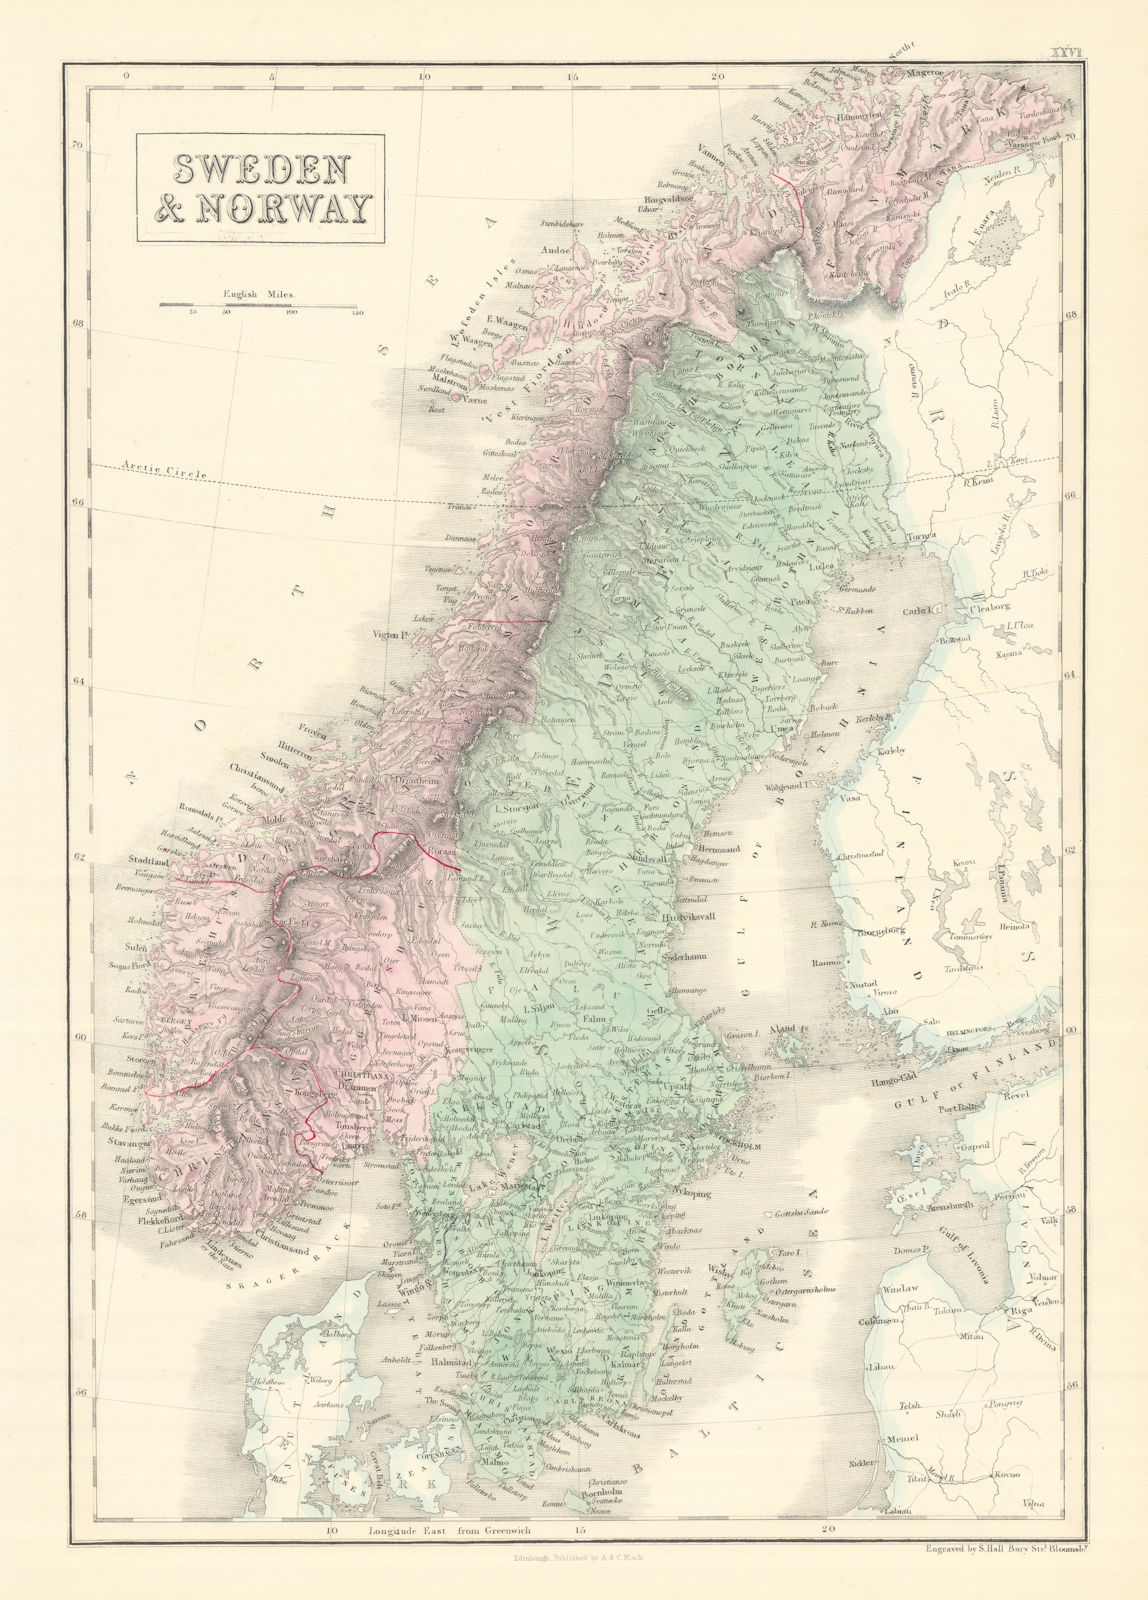 Sweden & Norway. Scandinavia showing provinces. SIDNEY HALL 1854 old map